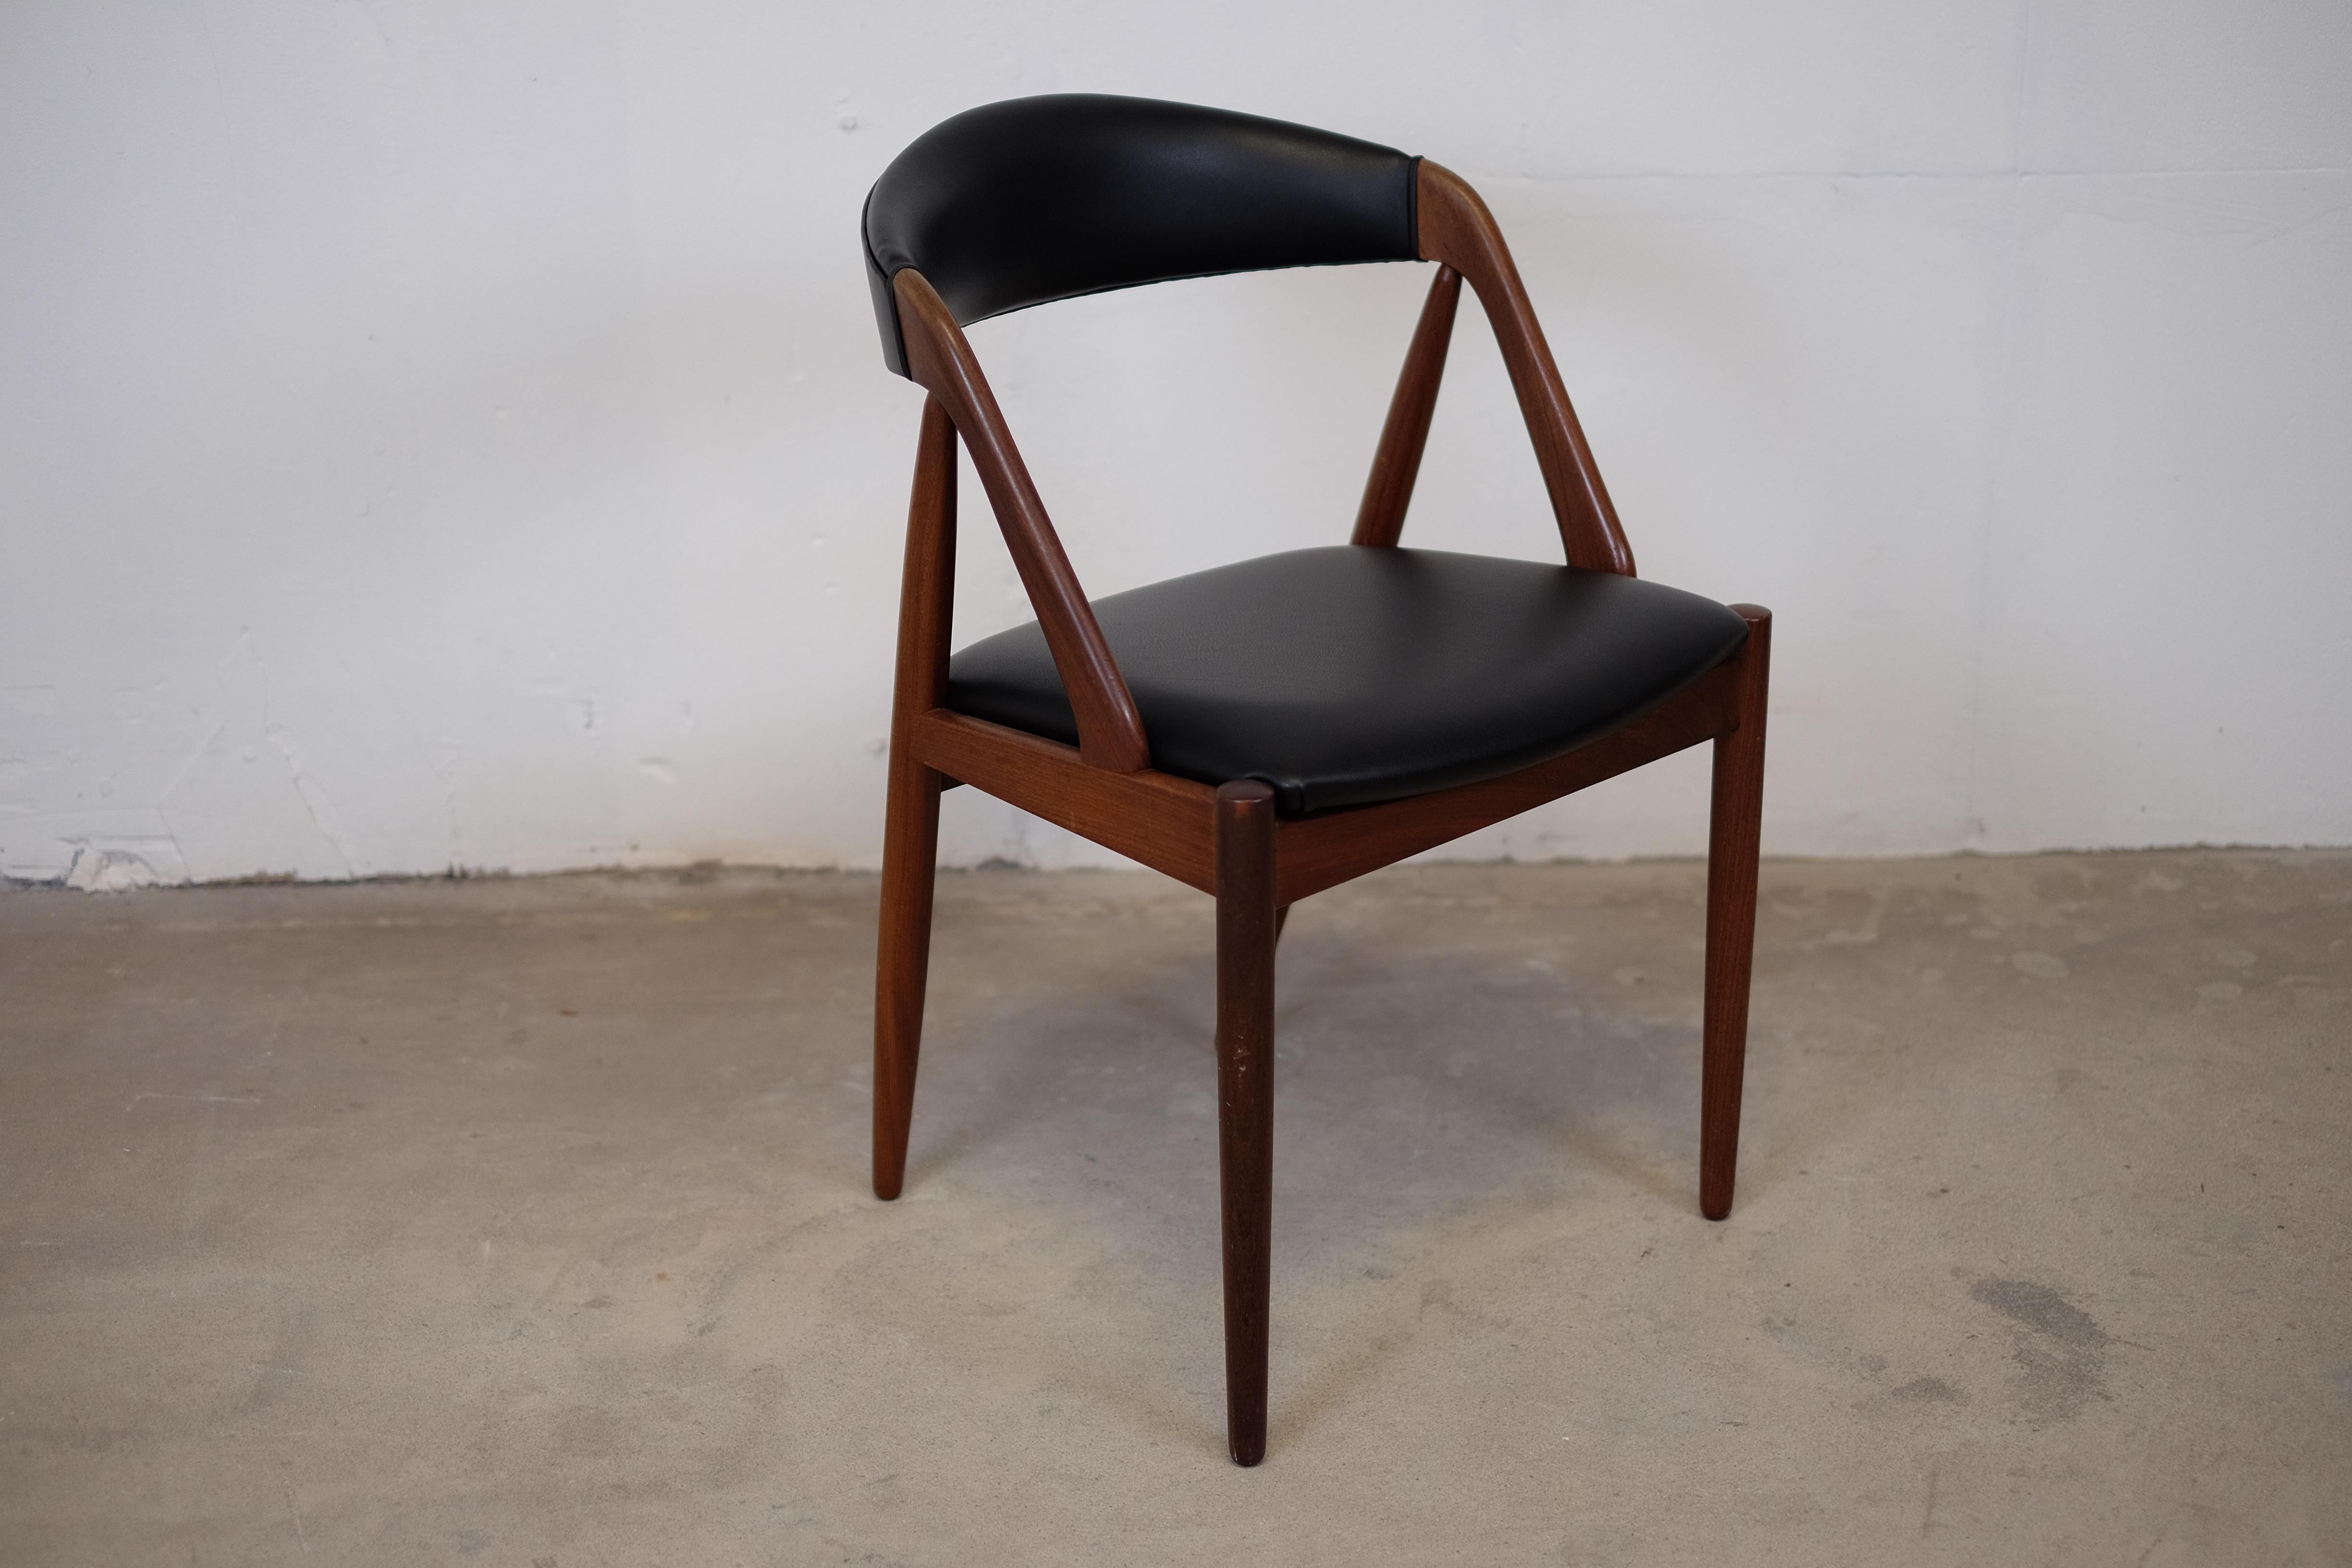 Stunning midcentury chairs ‘Model 31’ in teak by the Danish designer Kai Kristiansen for Schou Møbelfabrik, in 1956 and produced in the 1960s.

This stunning chairs are re-upholstered with real black leather. We have a lot more model 31 chairs in